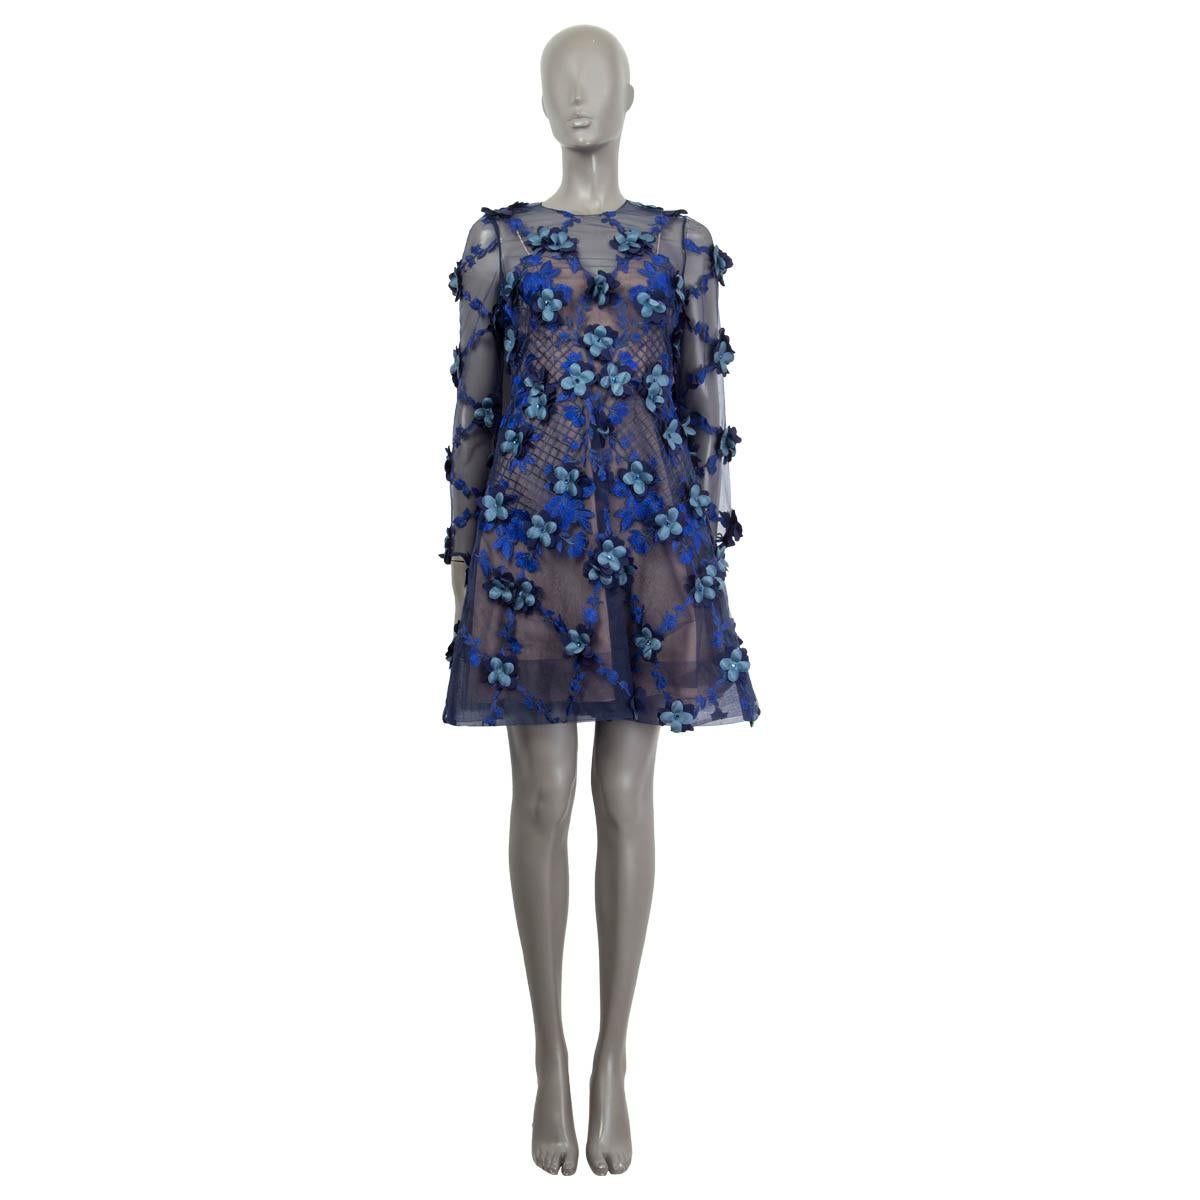 100% authentic Marchesa Notte floral semi sheer dress in electric blue polyester (100%). Features long sleeves and opens with a concealed zipper and a hook at the back. Lined in nude polyester (100%). Brand new, with tags.

Measurements
Tag